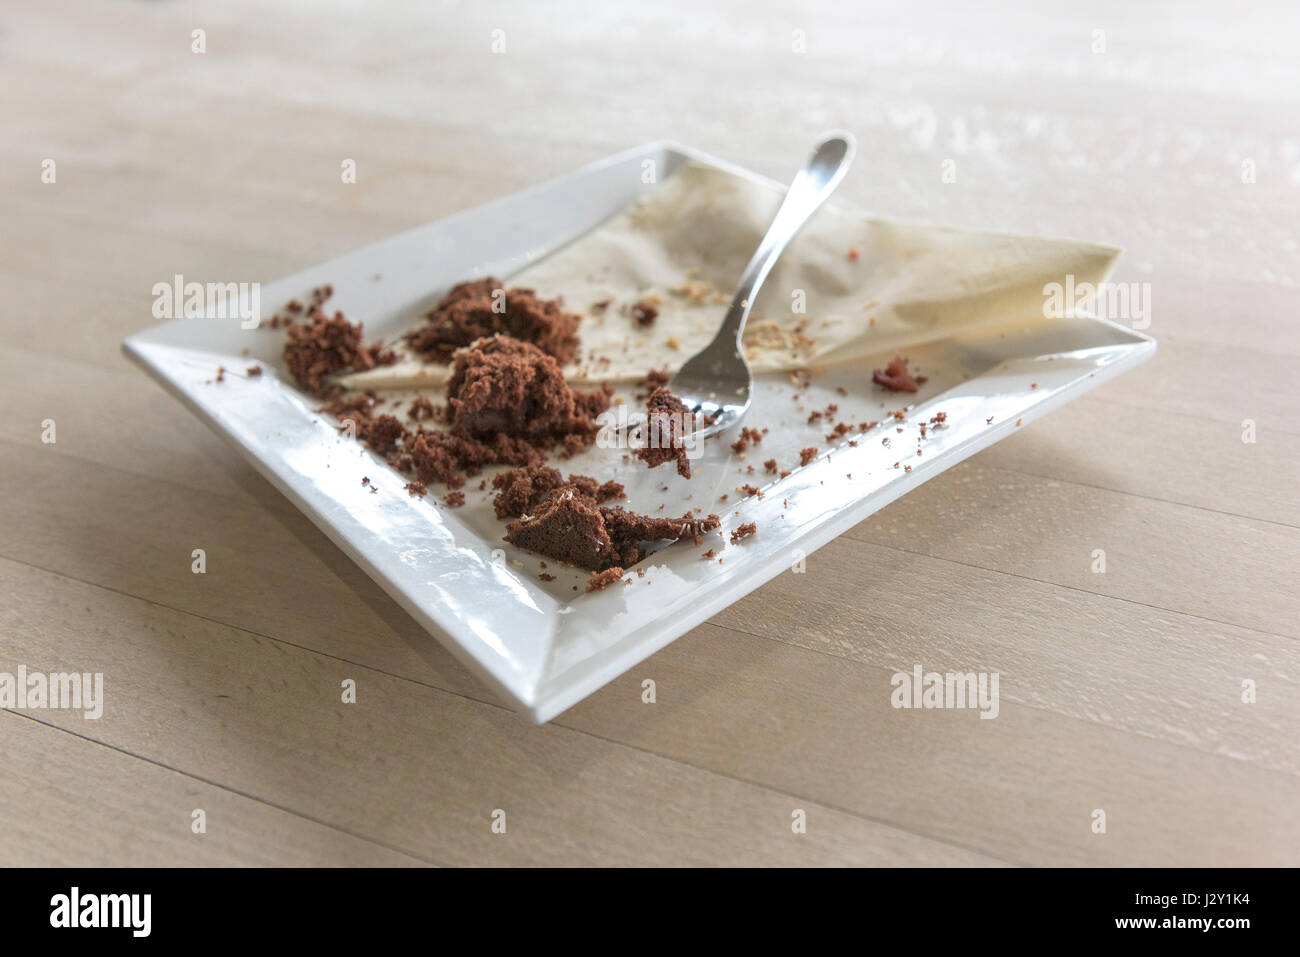 Food Remains of a chocolate cake Crumbs Plate Fork Cutlery Napkin Serviette Eaten Consumed Satisfied Satisfaction Treat Indulgence Stock Photo